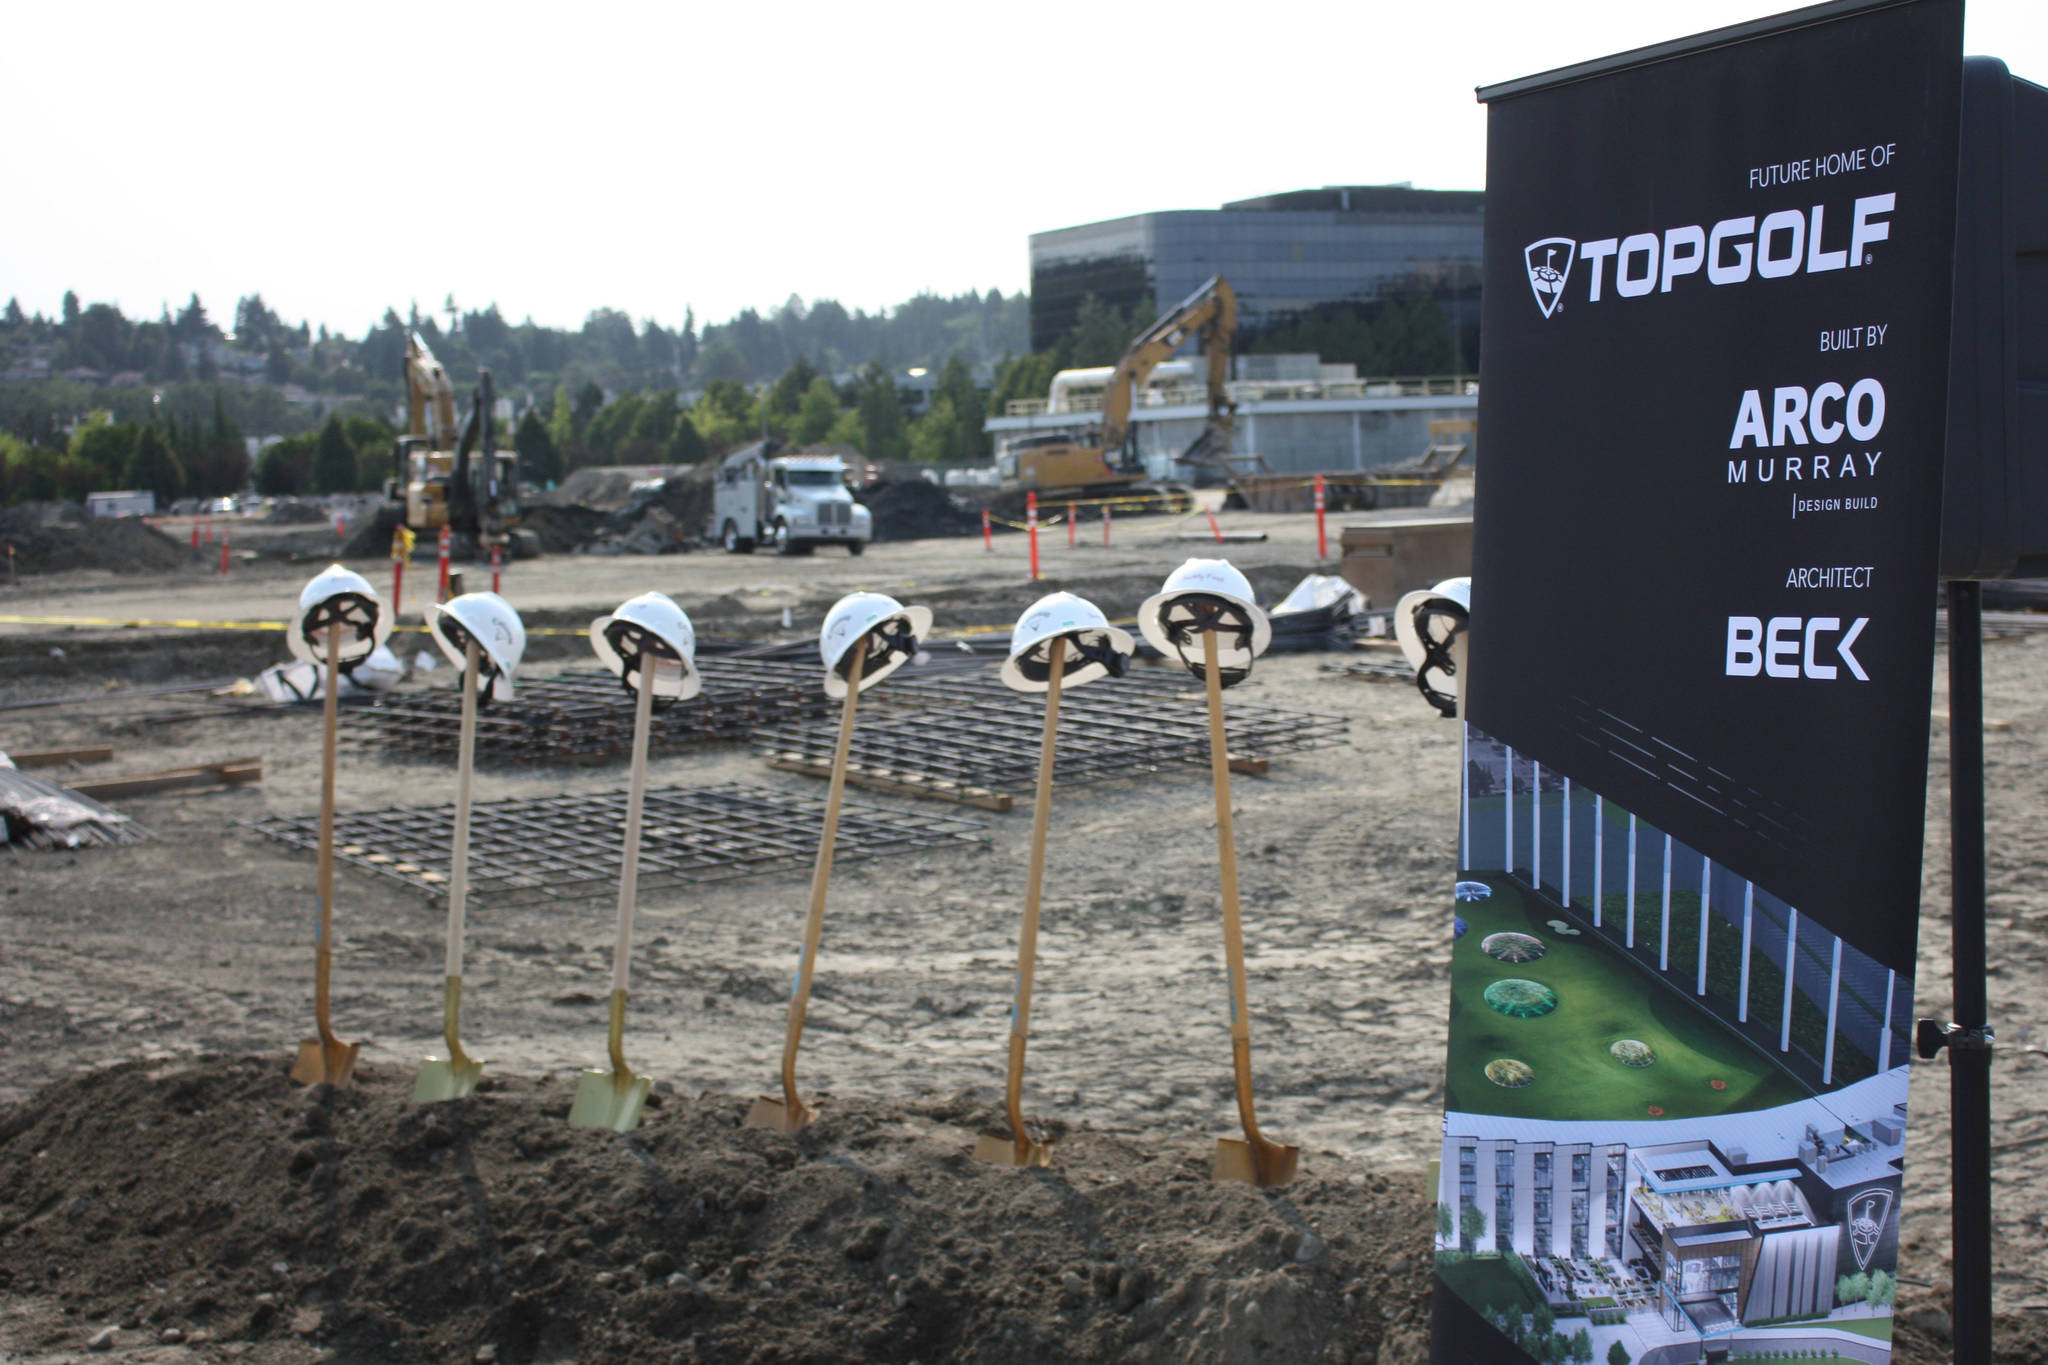 Shovels lined up for Topgolf breaking ground ceremony on August 3 (photo credit: Cameron Sheppard)